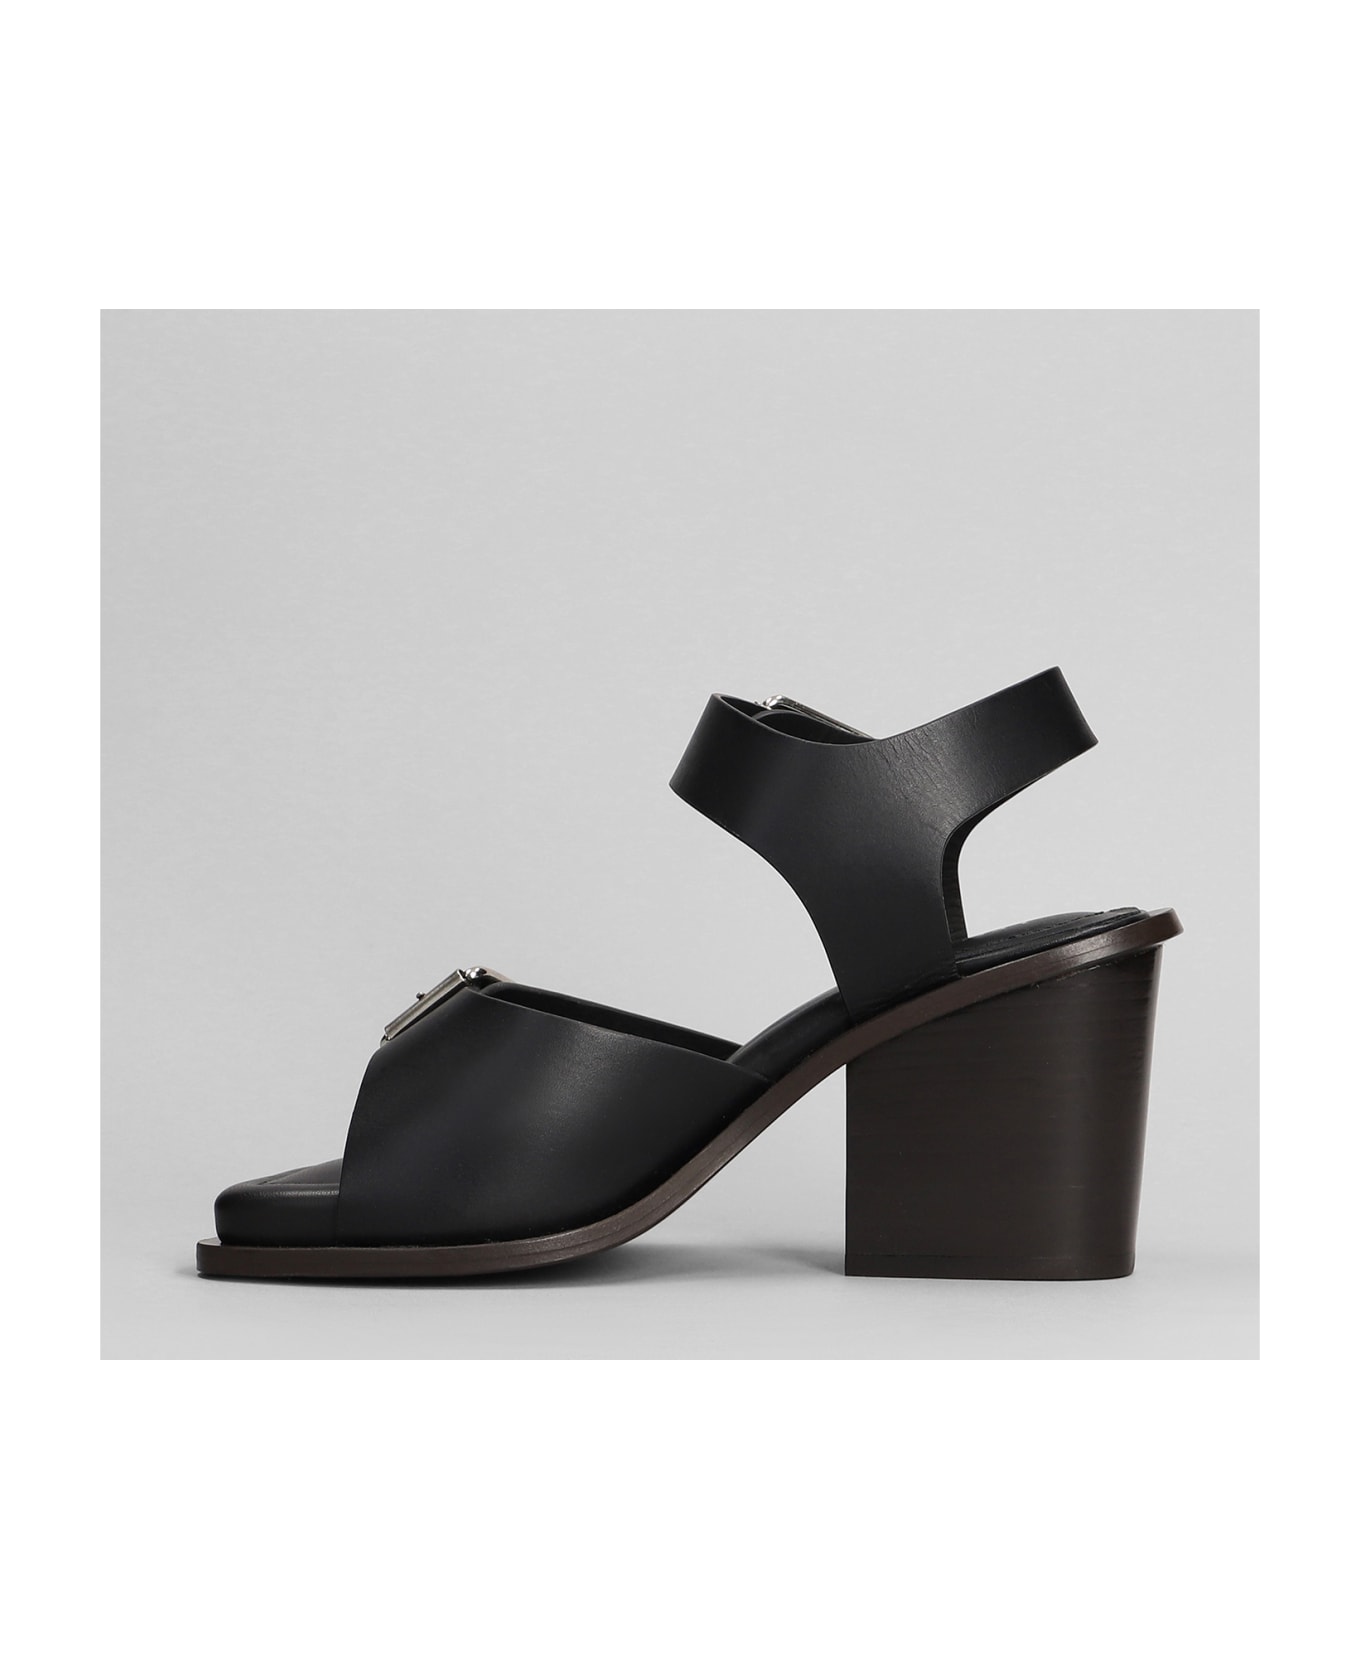 Lemaire Sandals In Black Leather - black